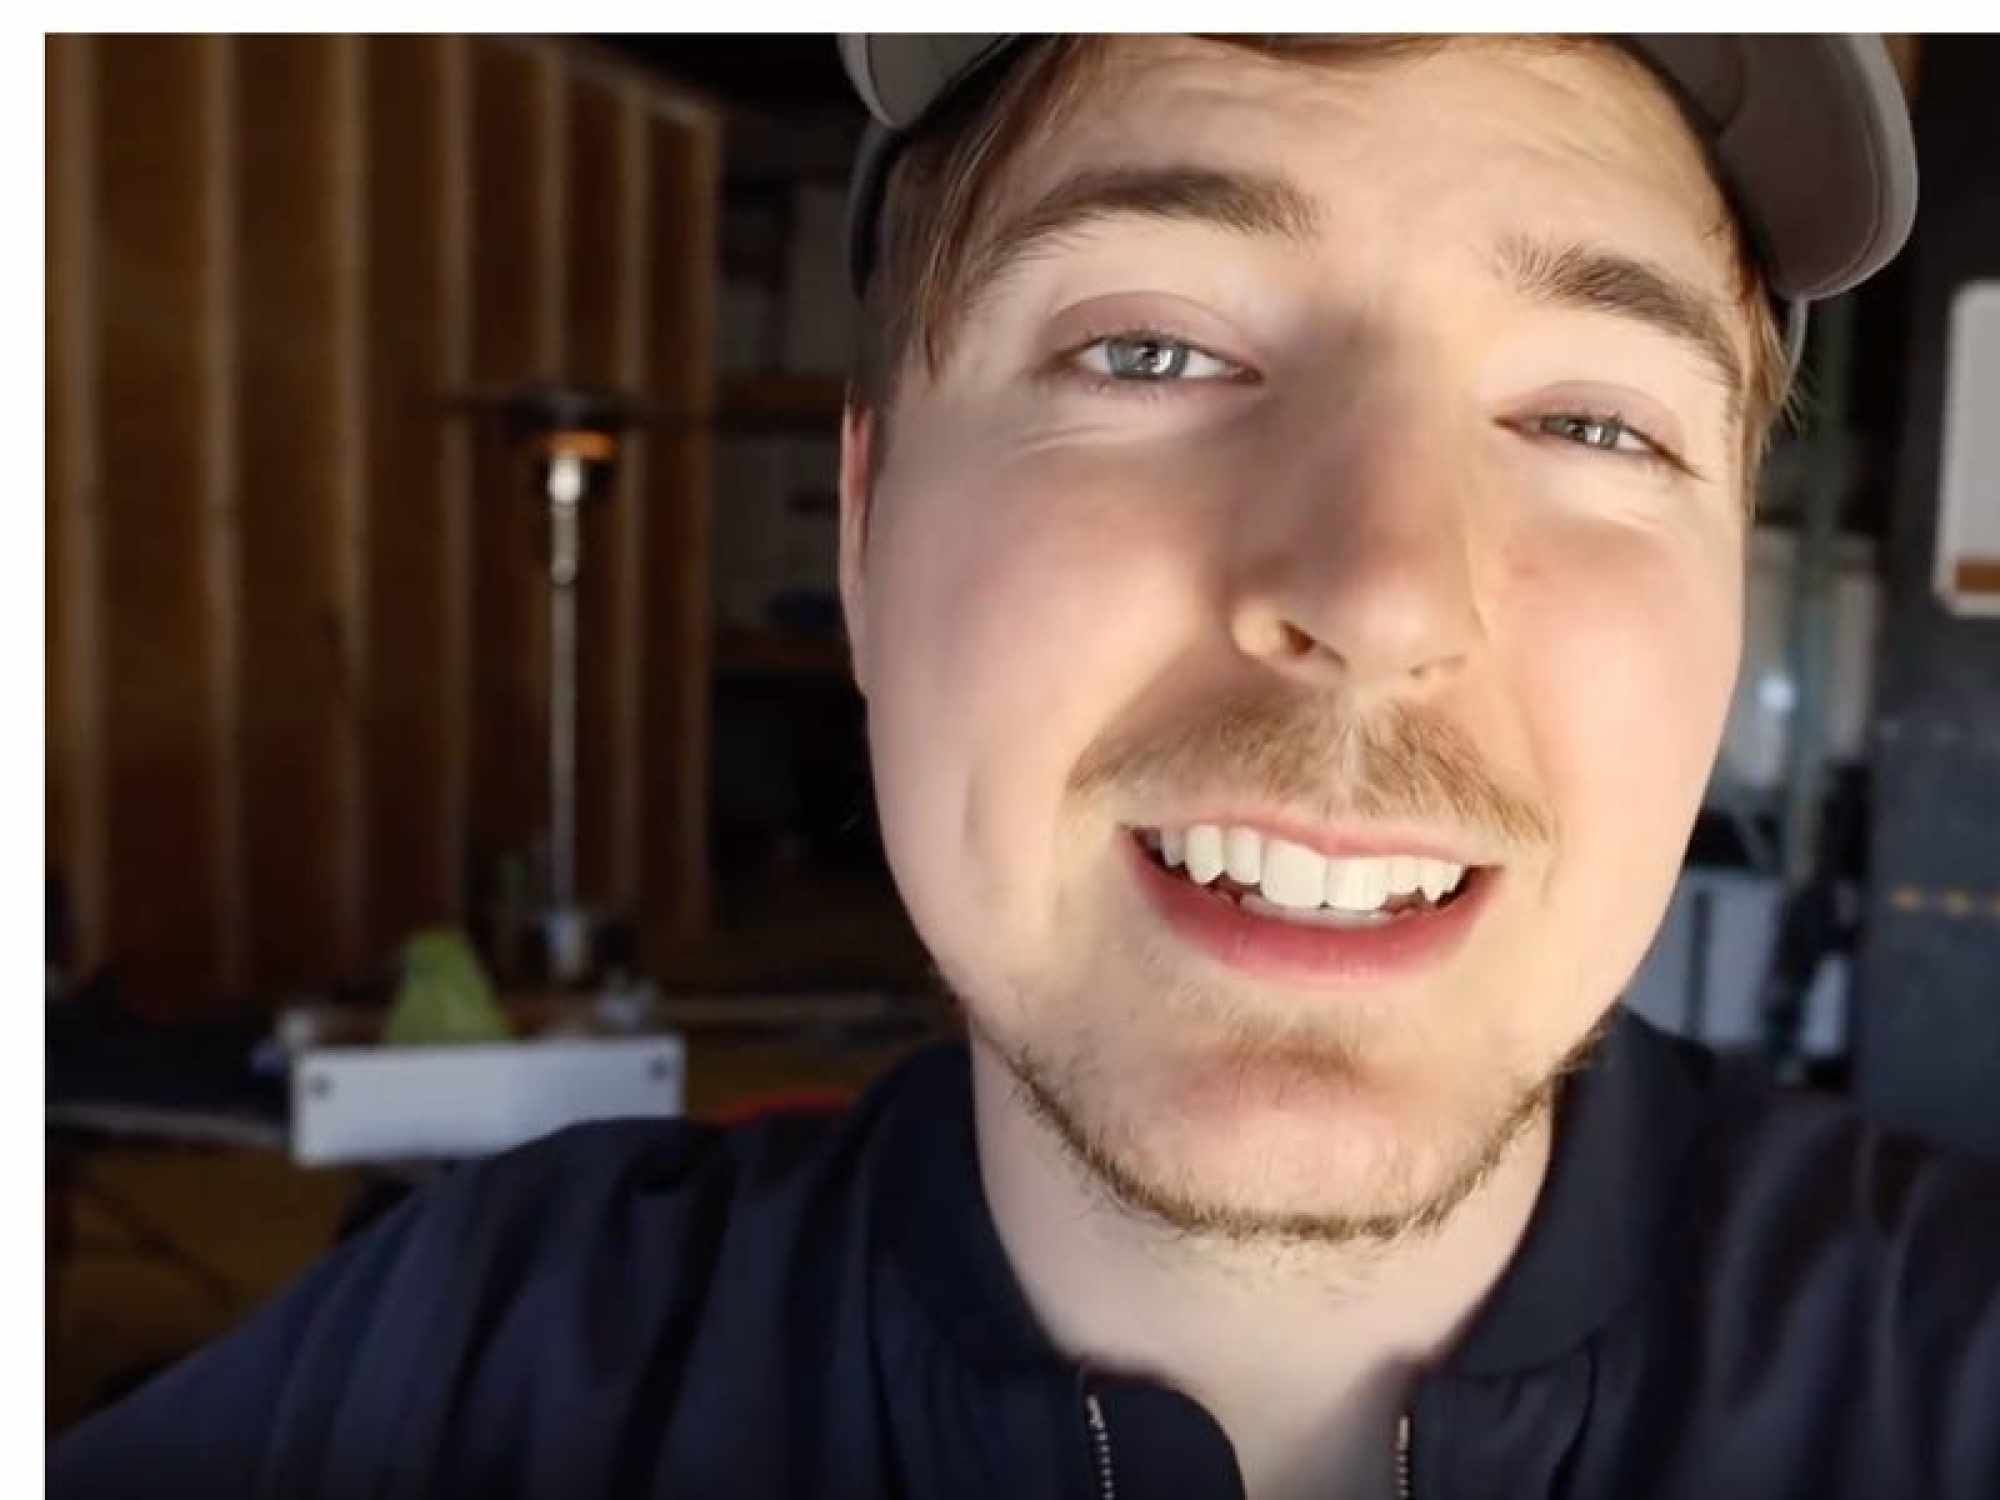 No, MrBeast Isn't Dead: False Claim About the Influencer Goes Viral